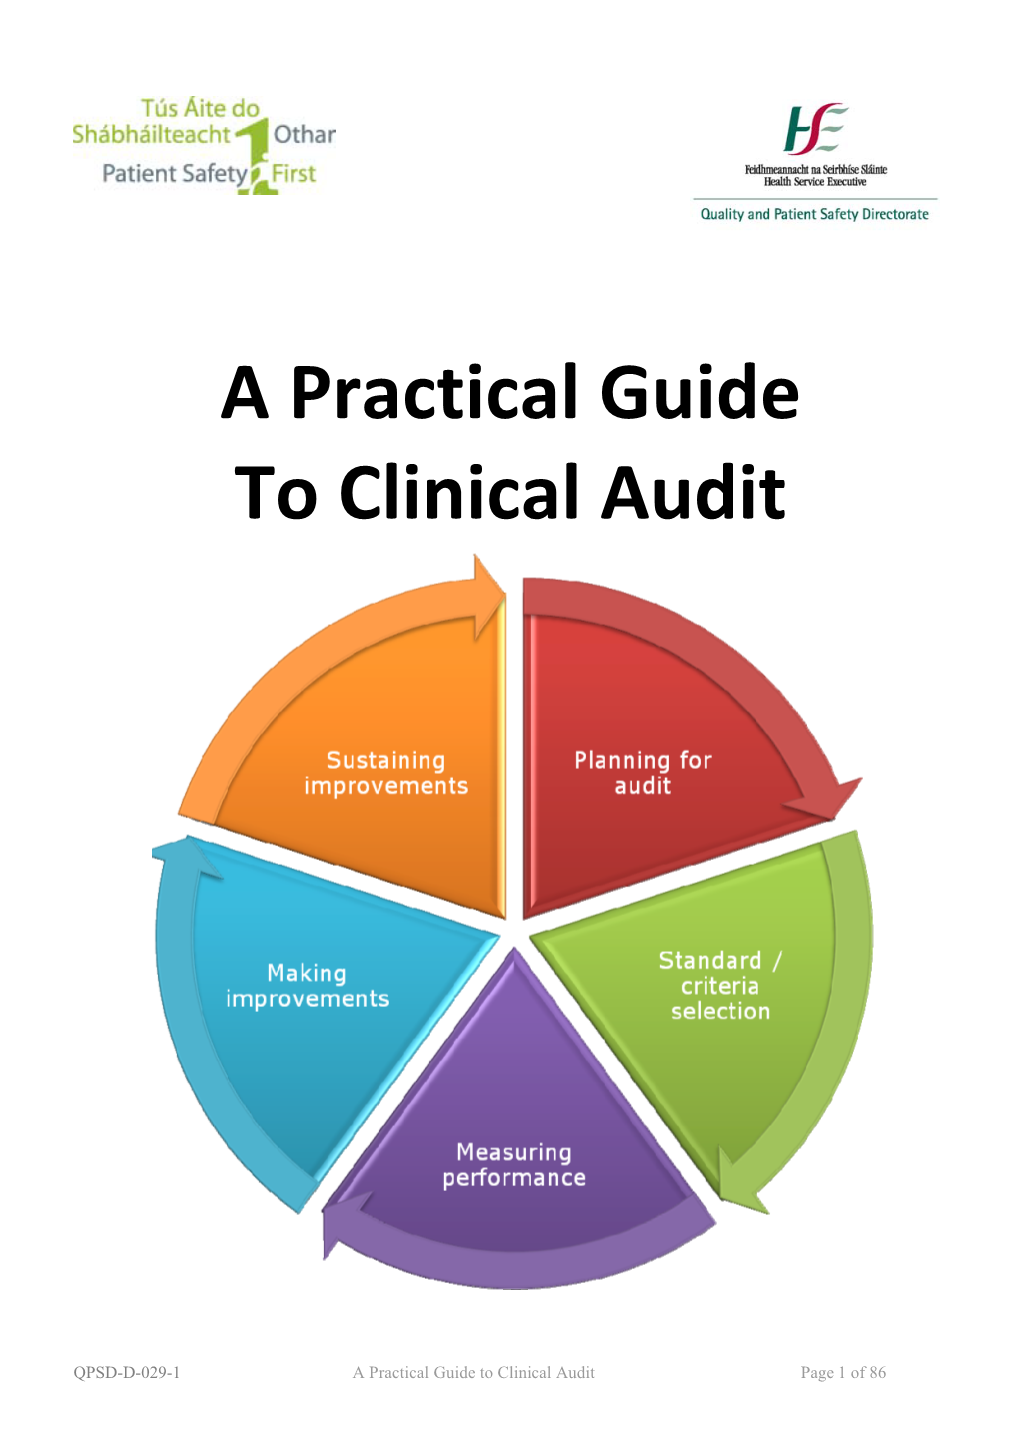 A Practical Guide to Clinical Audit